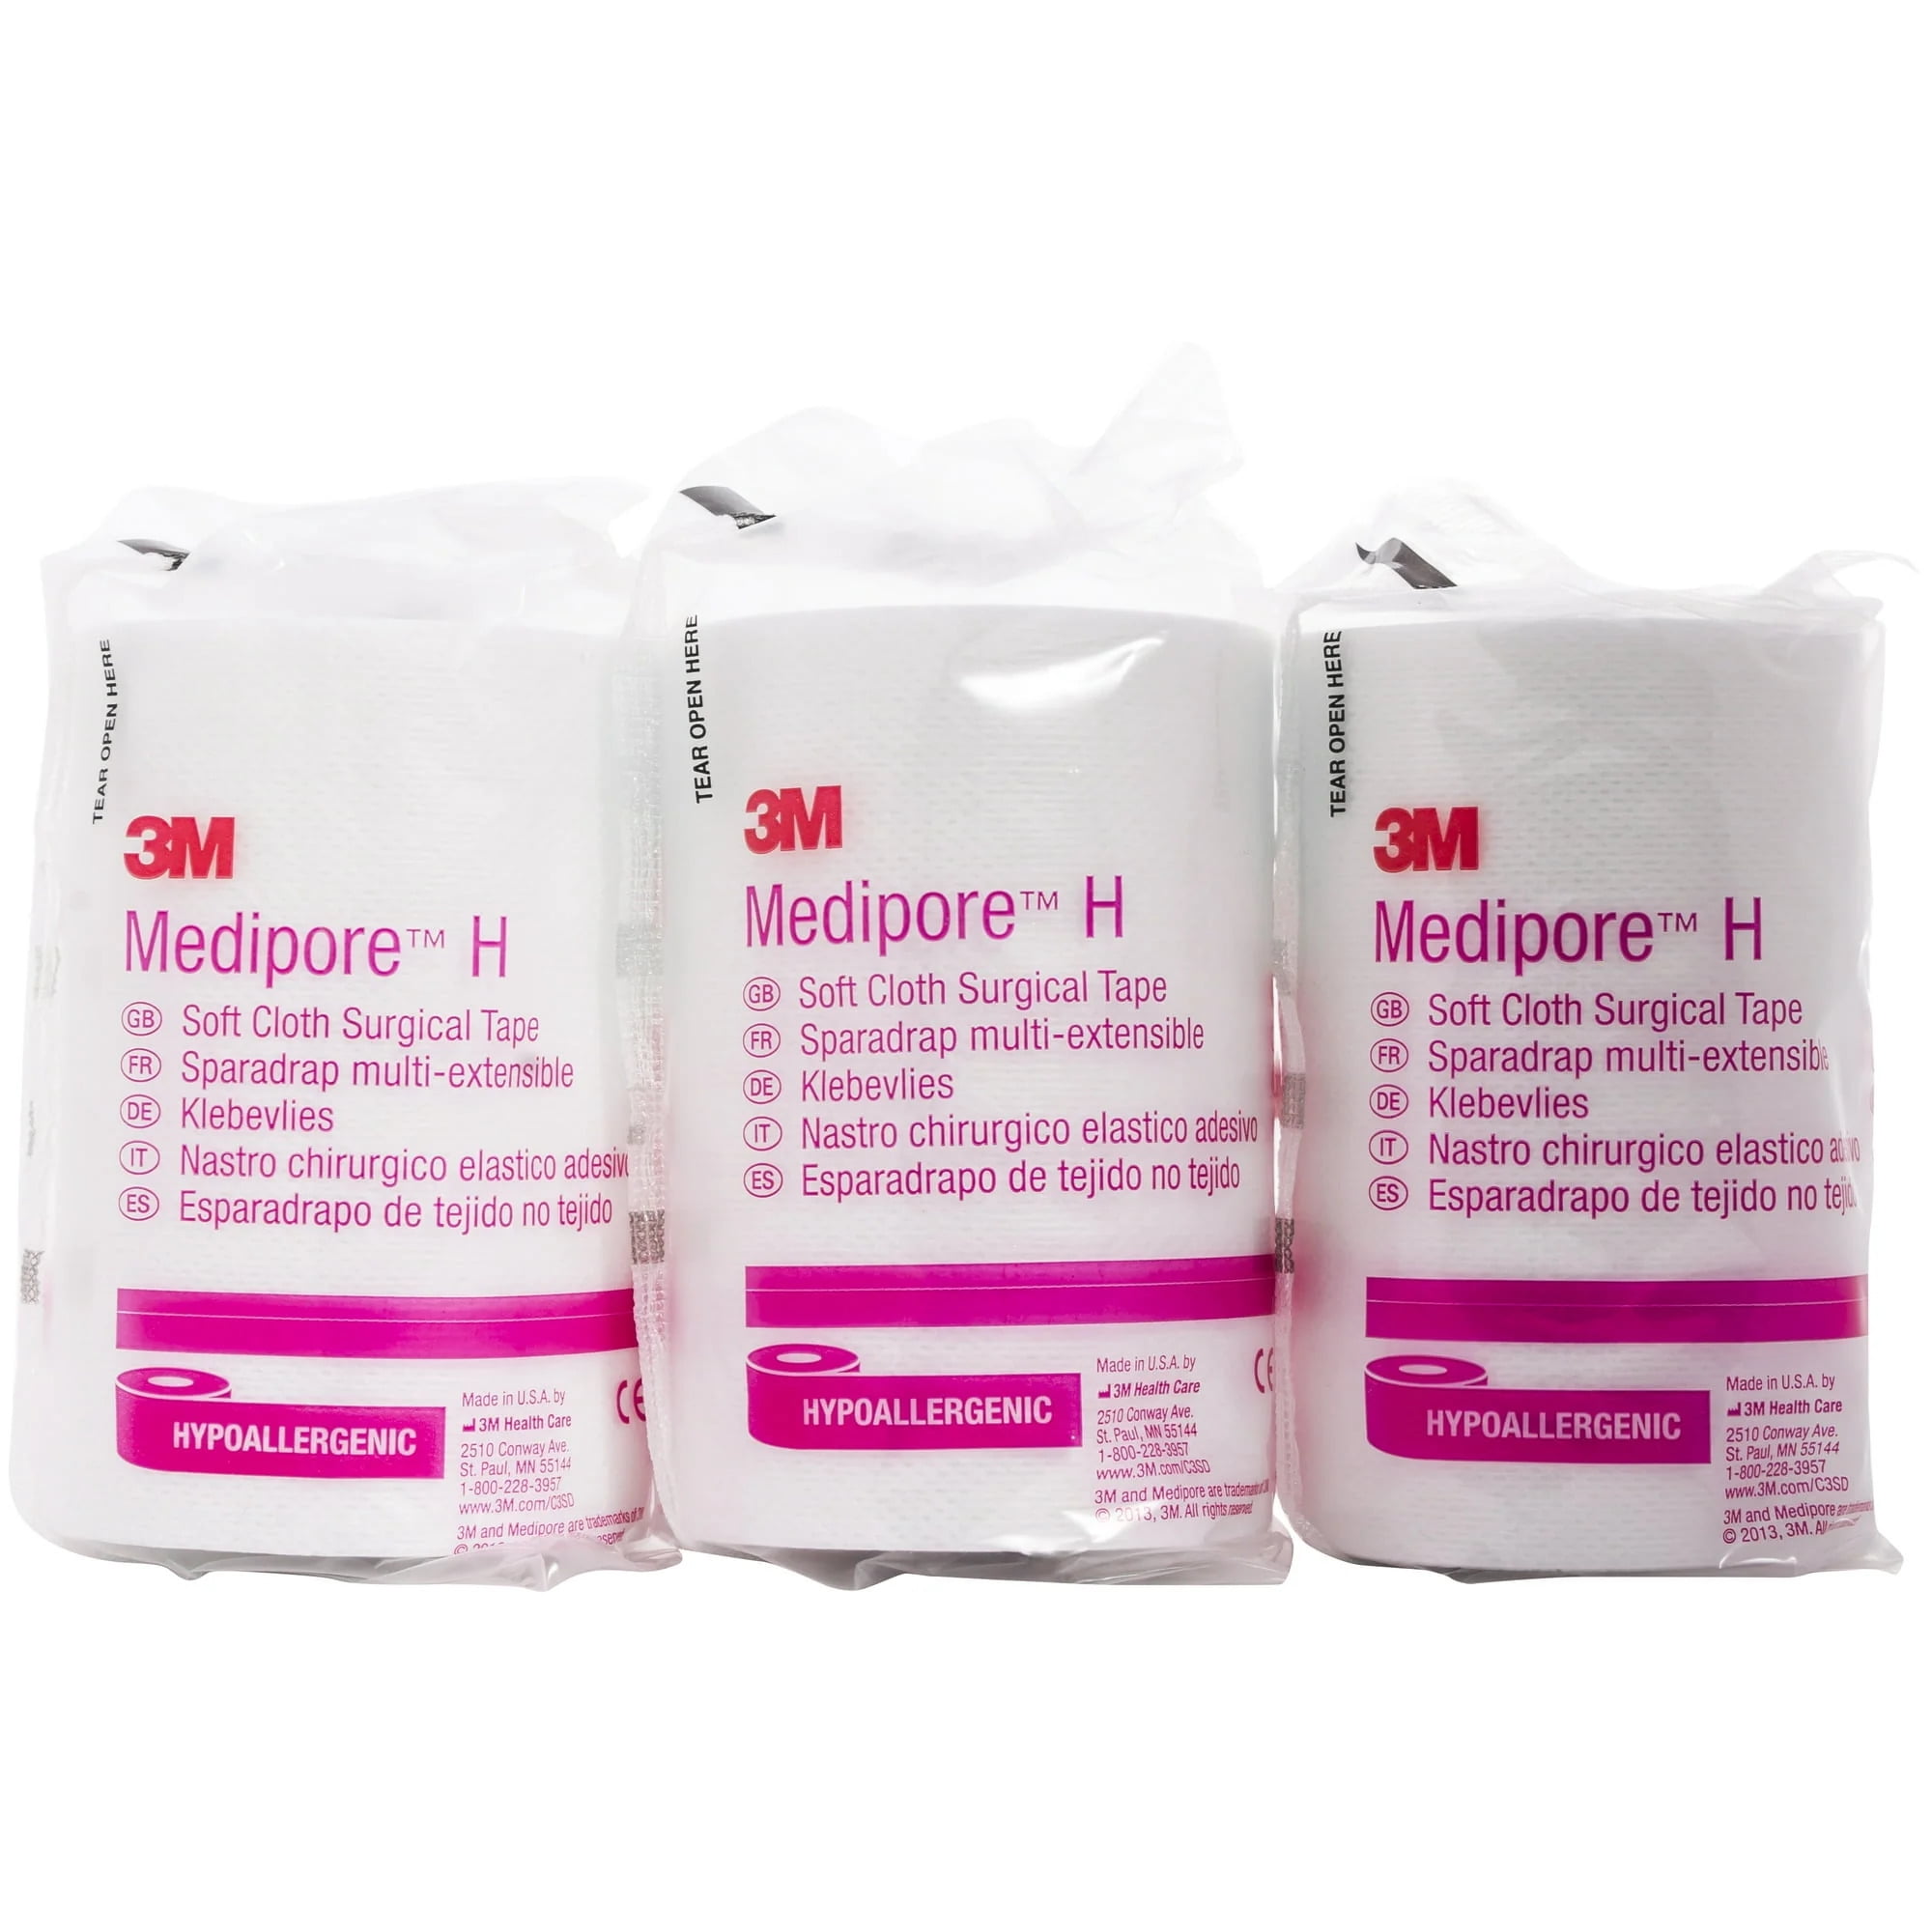 3M 2864 Medipore H Soft Cloth Surgical Tape 4 x 10 yd - 3 Rolls